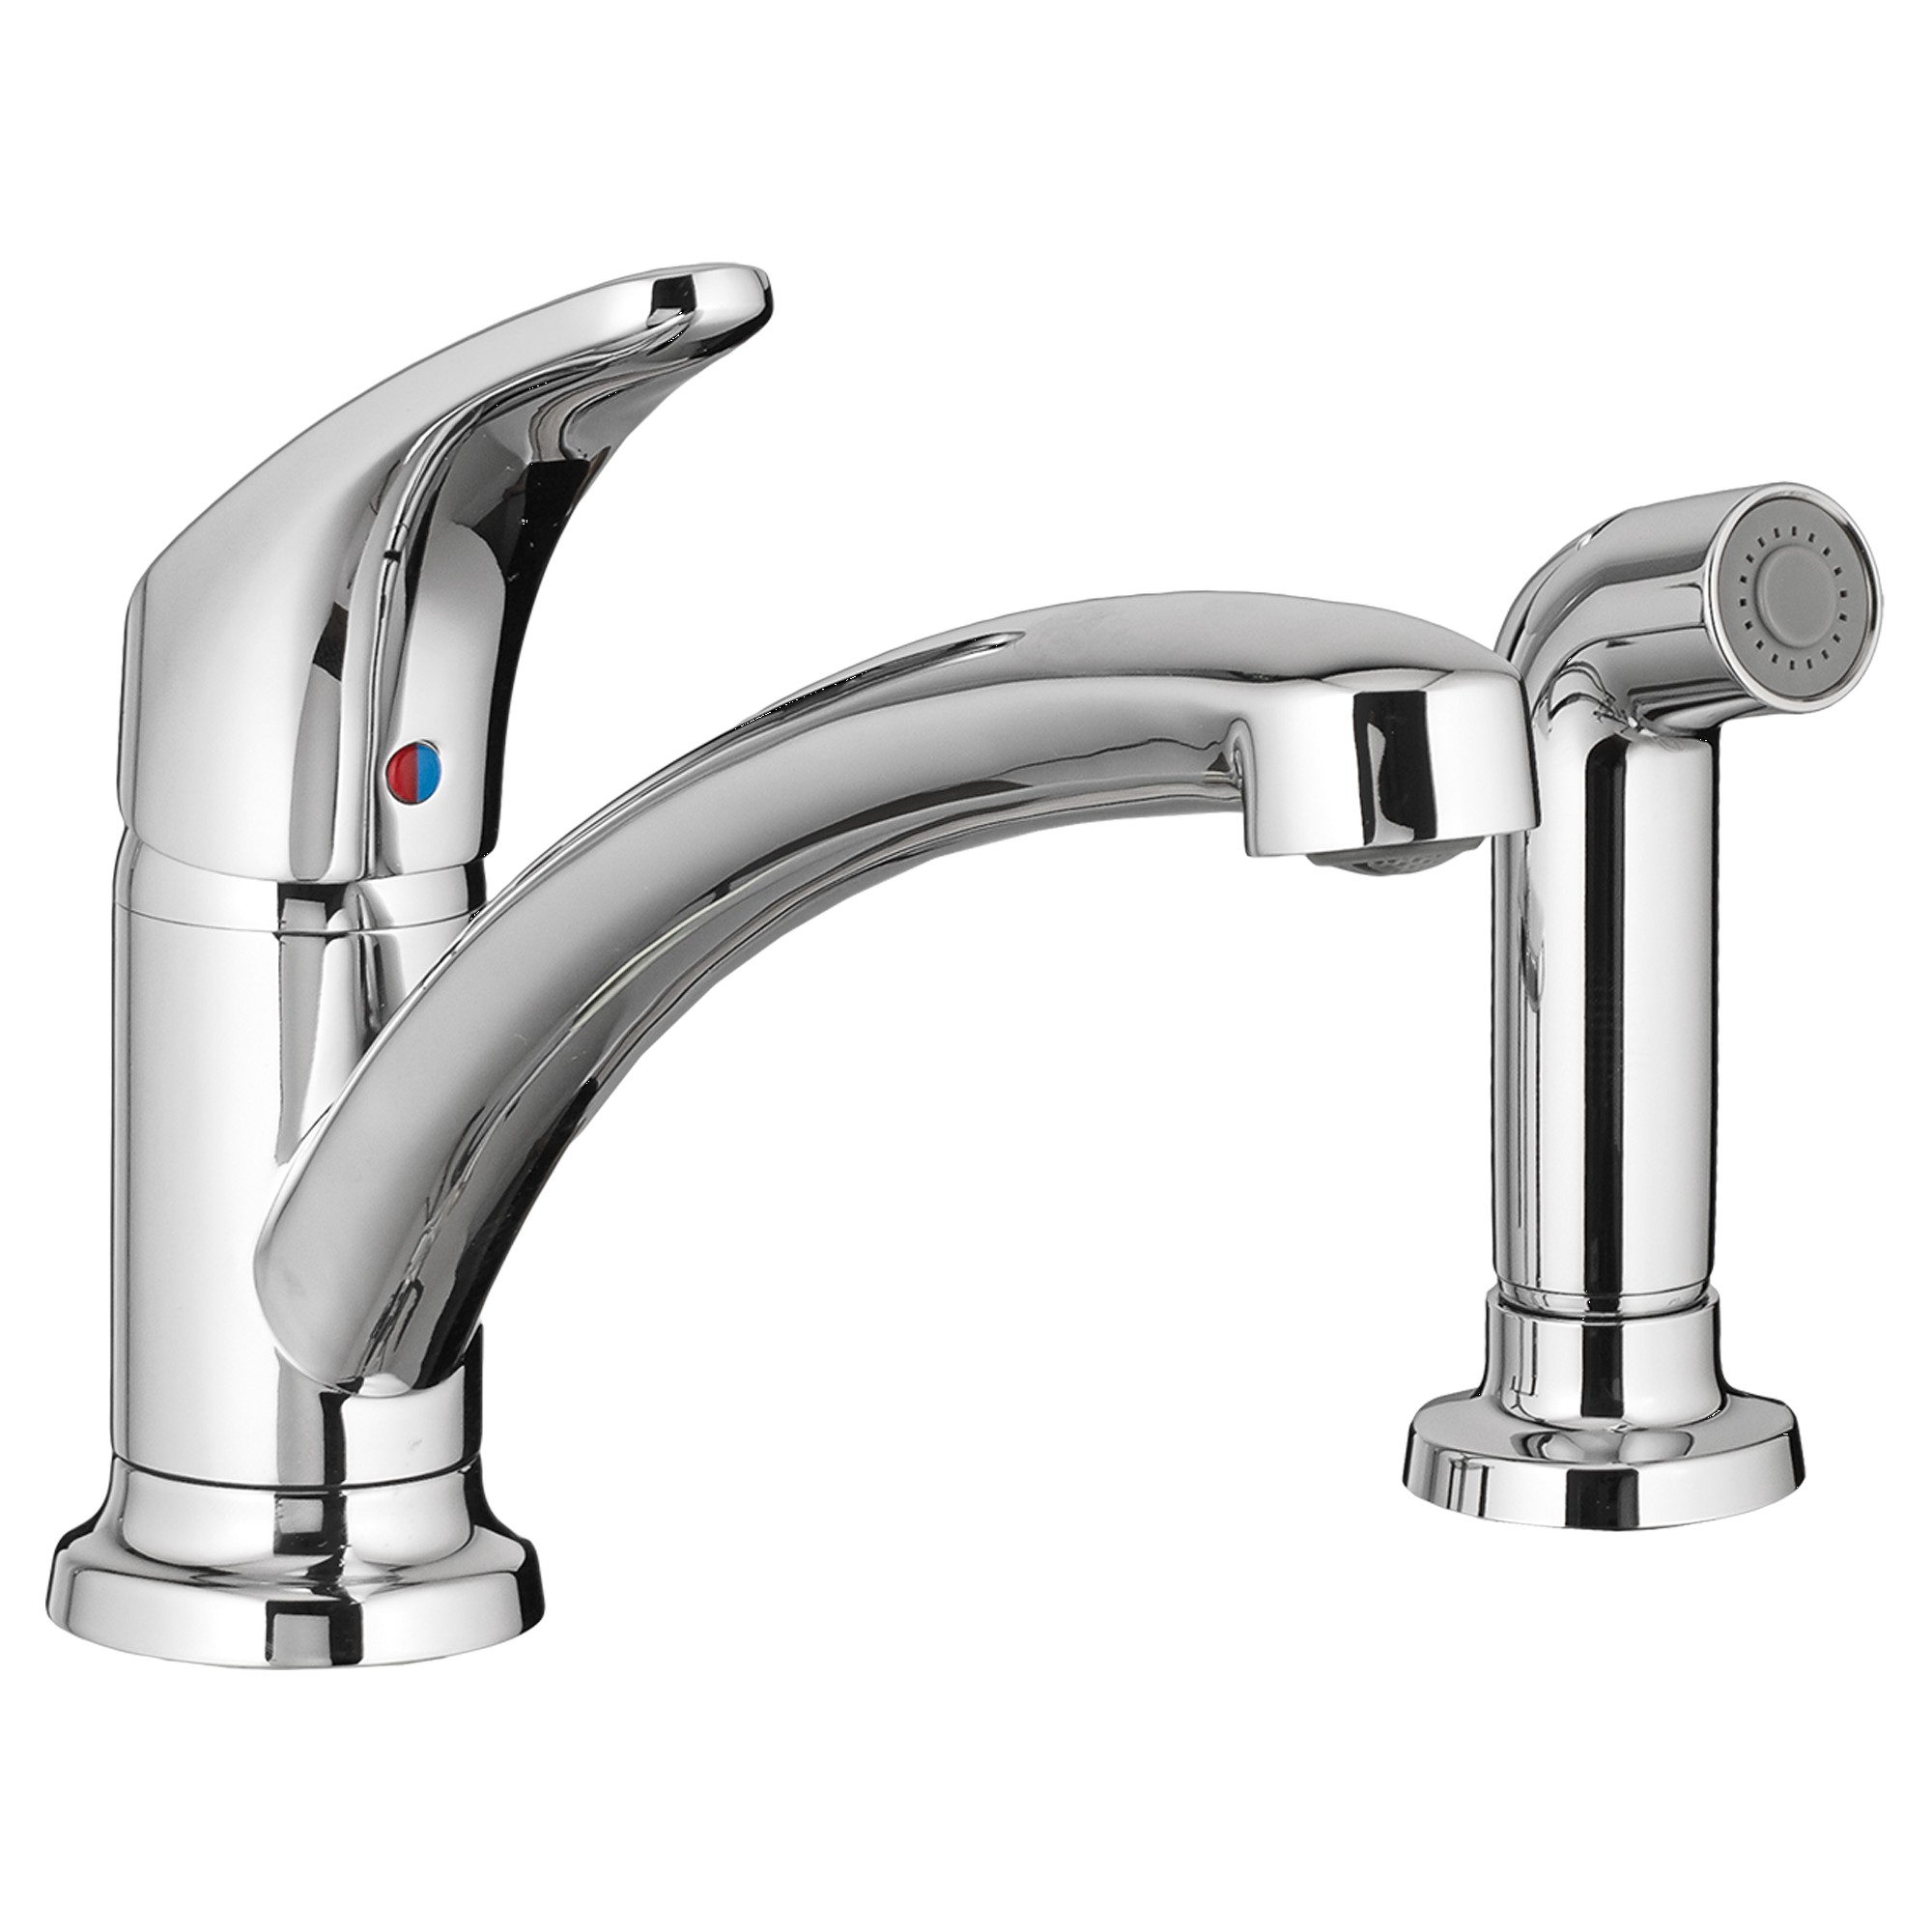 American Standard | 7074.020.002 | AMERICAN STANDARD 7074.020 COLONY PRO KITCHEN FAUCET CP 002 POLISHED CHROME 1-HANDLE 2-HOLE WITH SIDE SPRAY